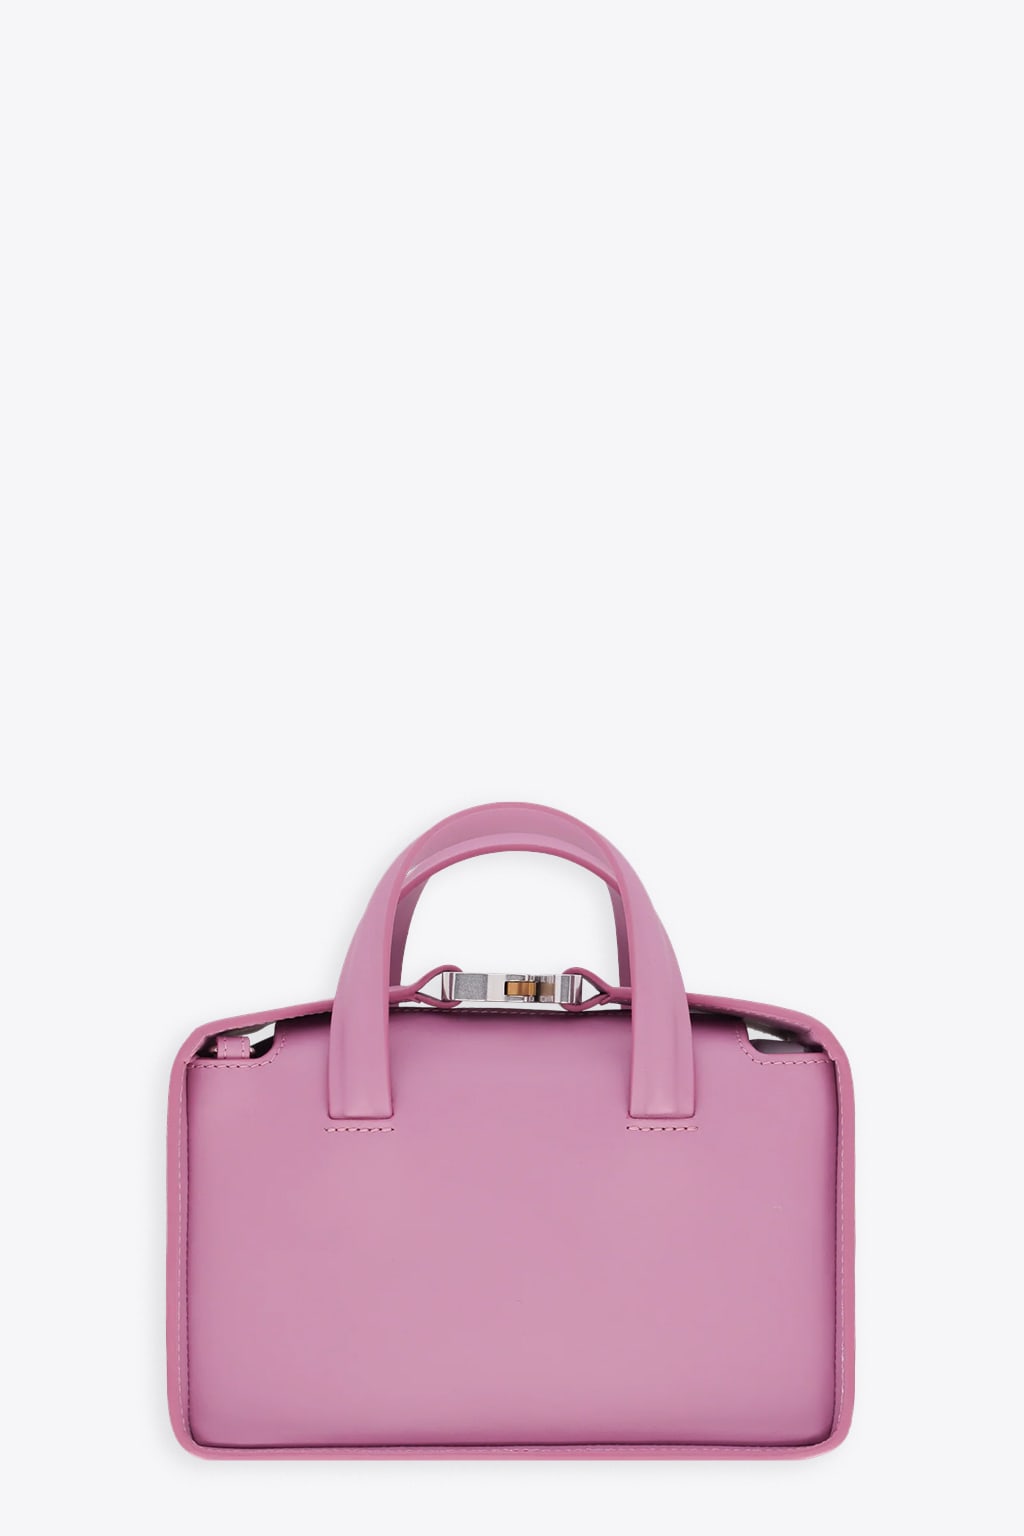 Alyx Brie Bag Bubble Pink Leather Bag - Brie Bag In Rosa | ModeSens